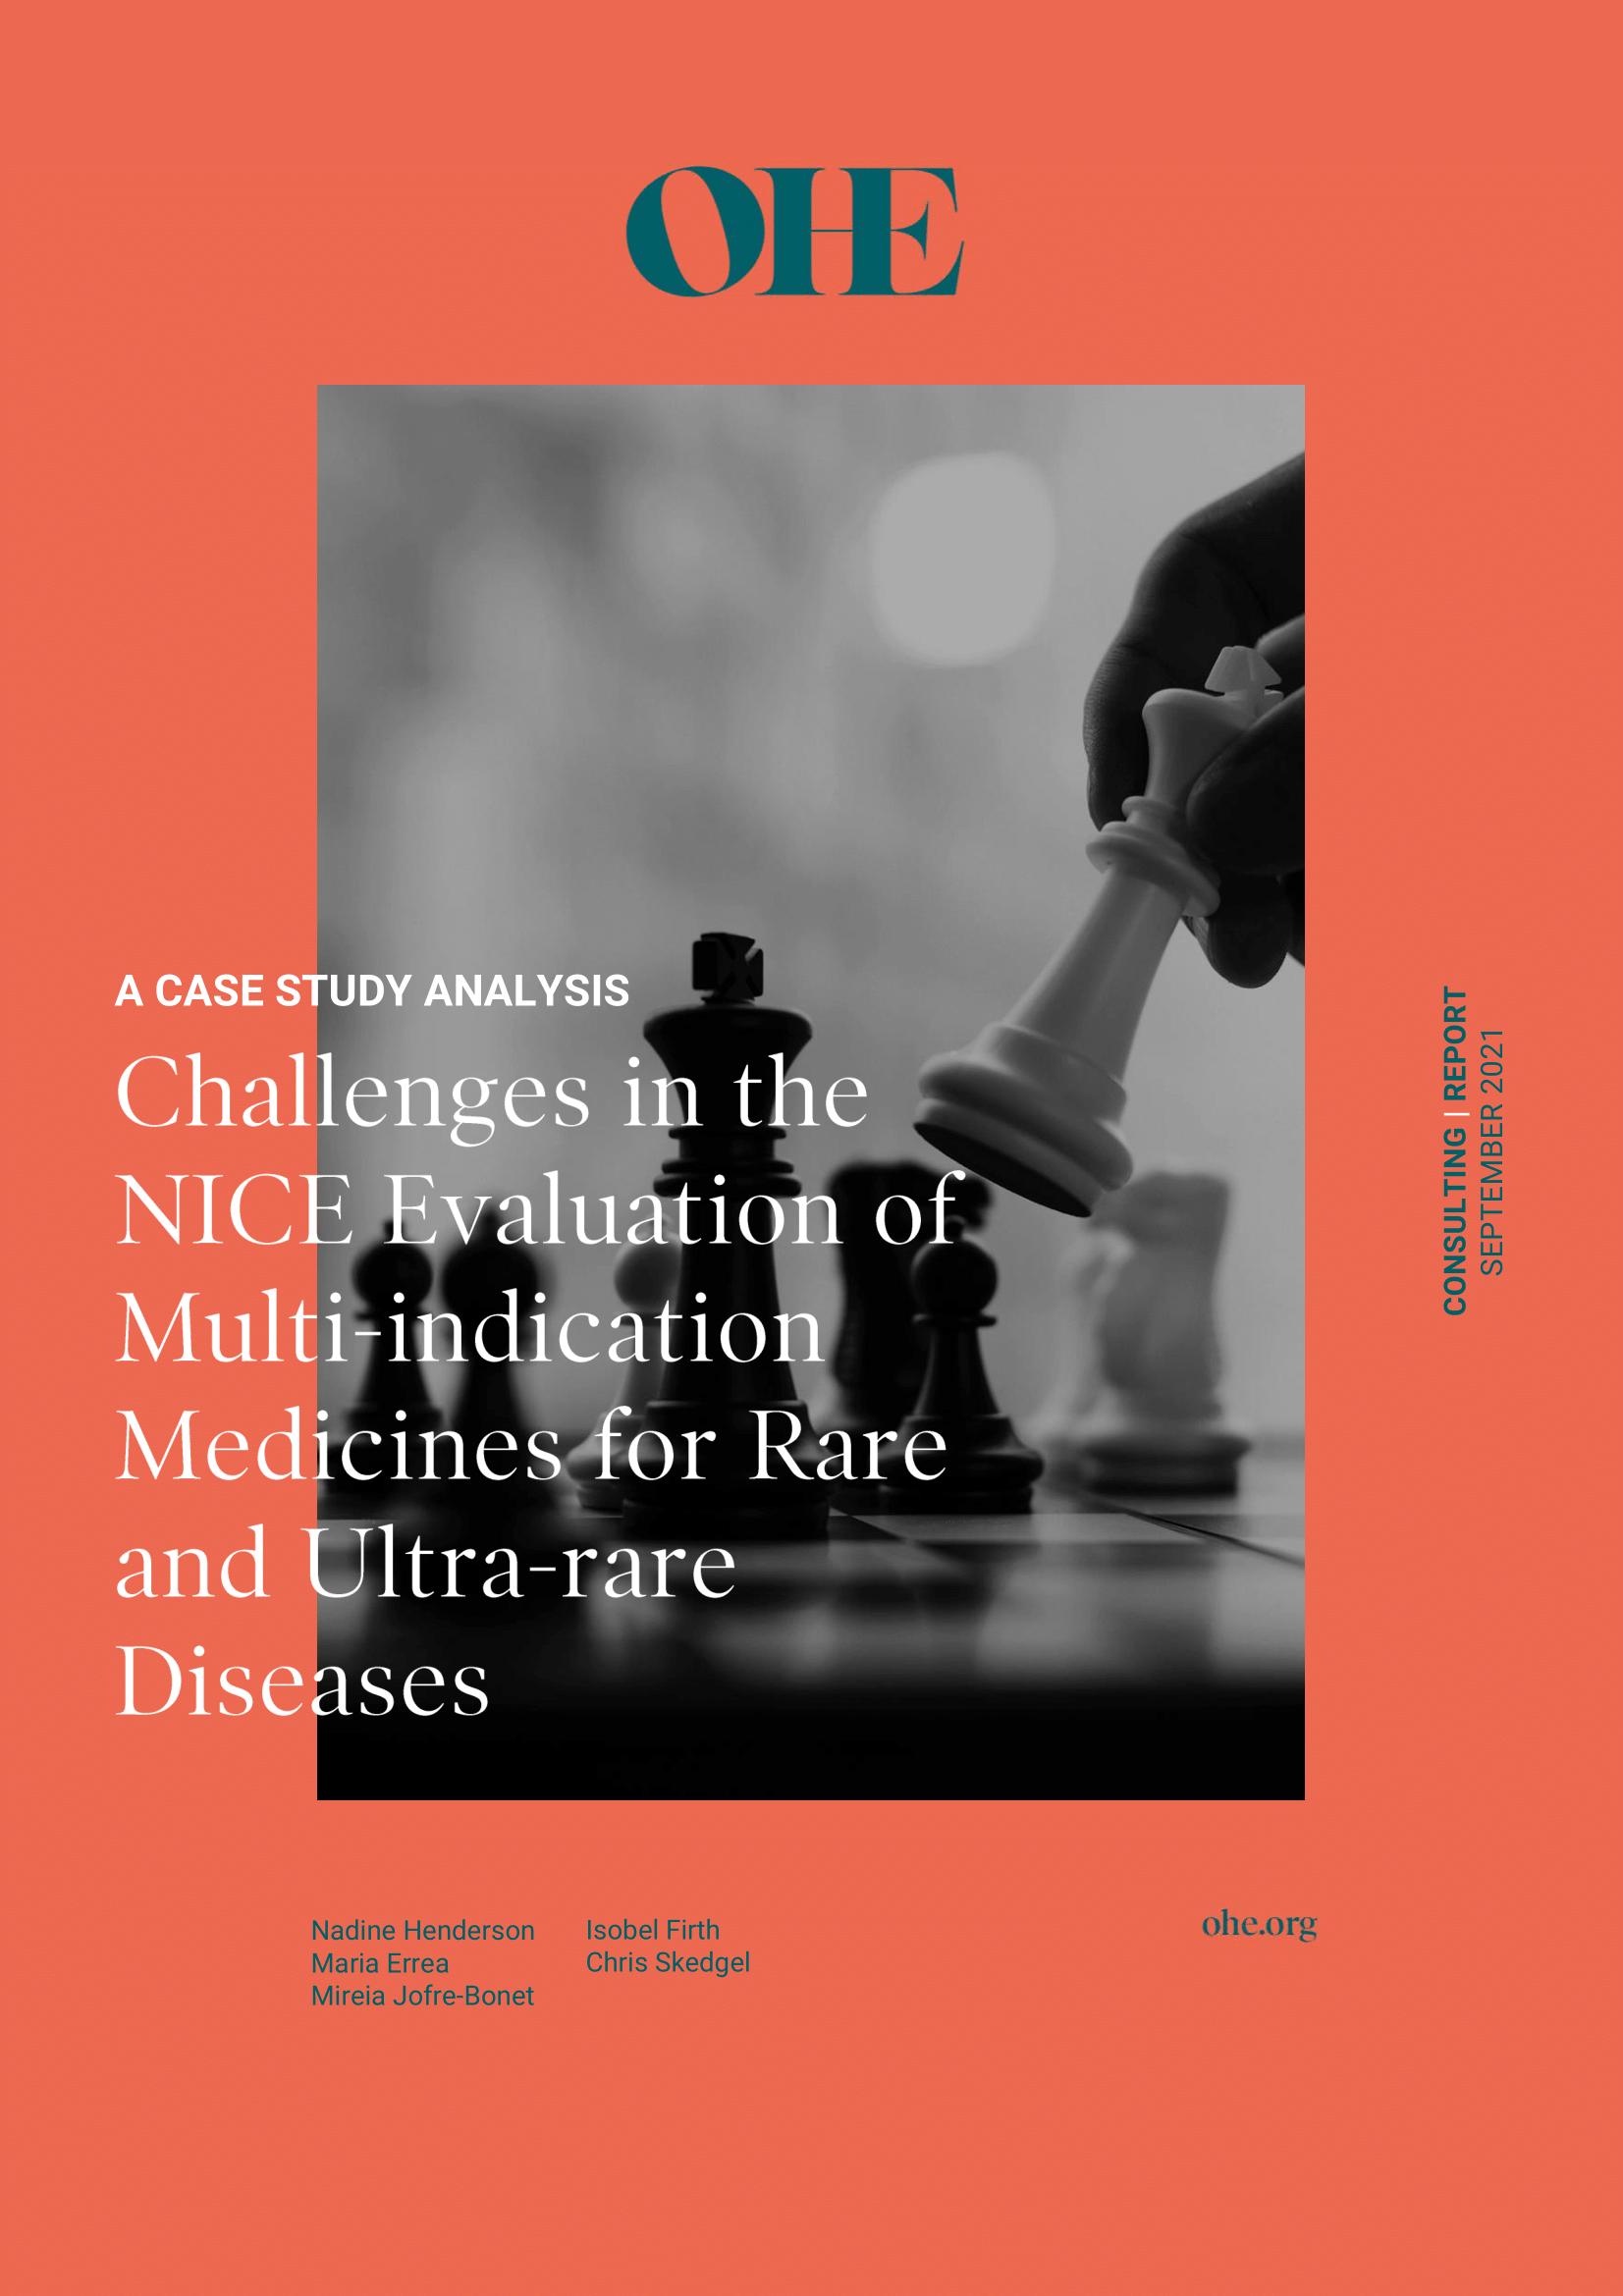 A Case Study Analysis: Challenges in the NICE Evaluation of Multi-Indication Medicines for Rare and Ultra-Rare Diseases